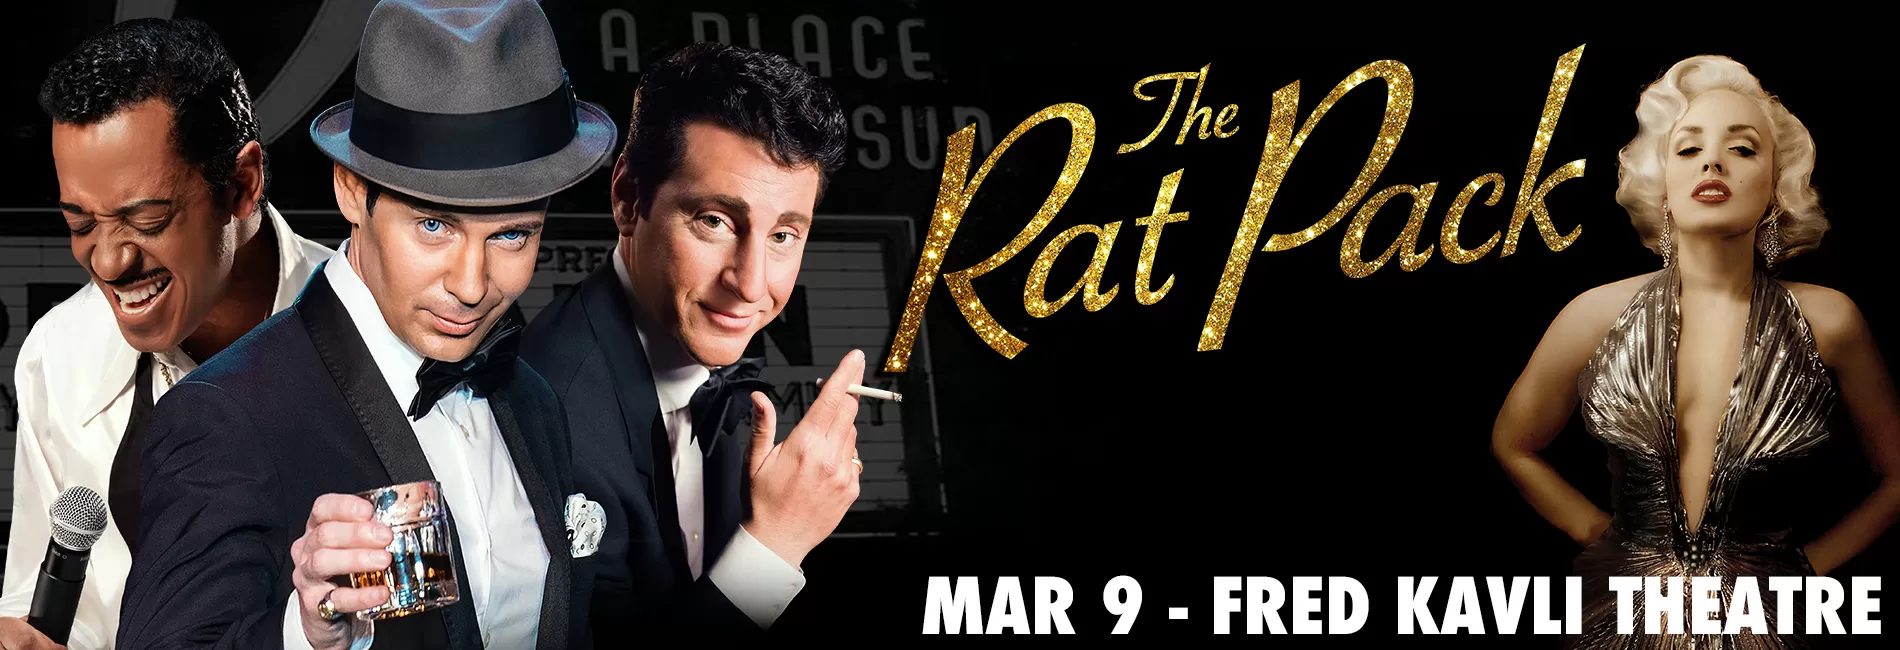 The Rat Pack in Concert